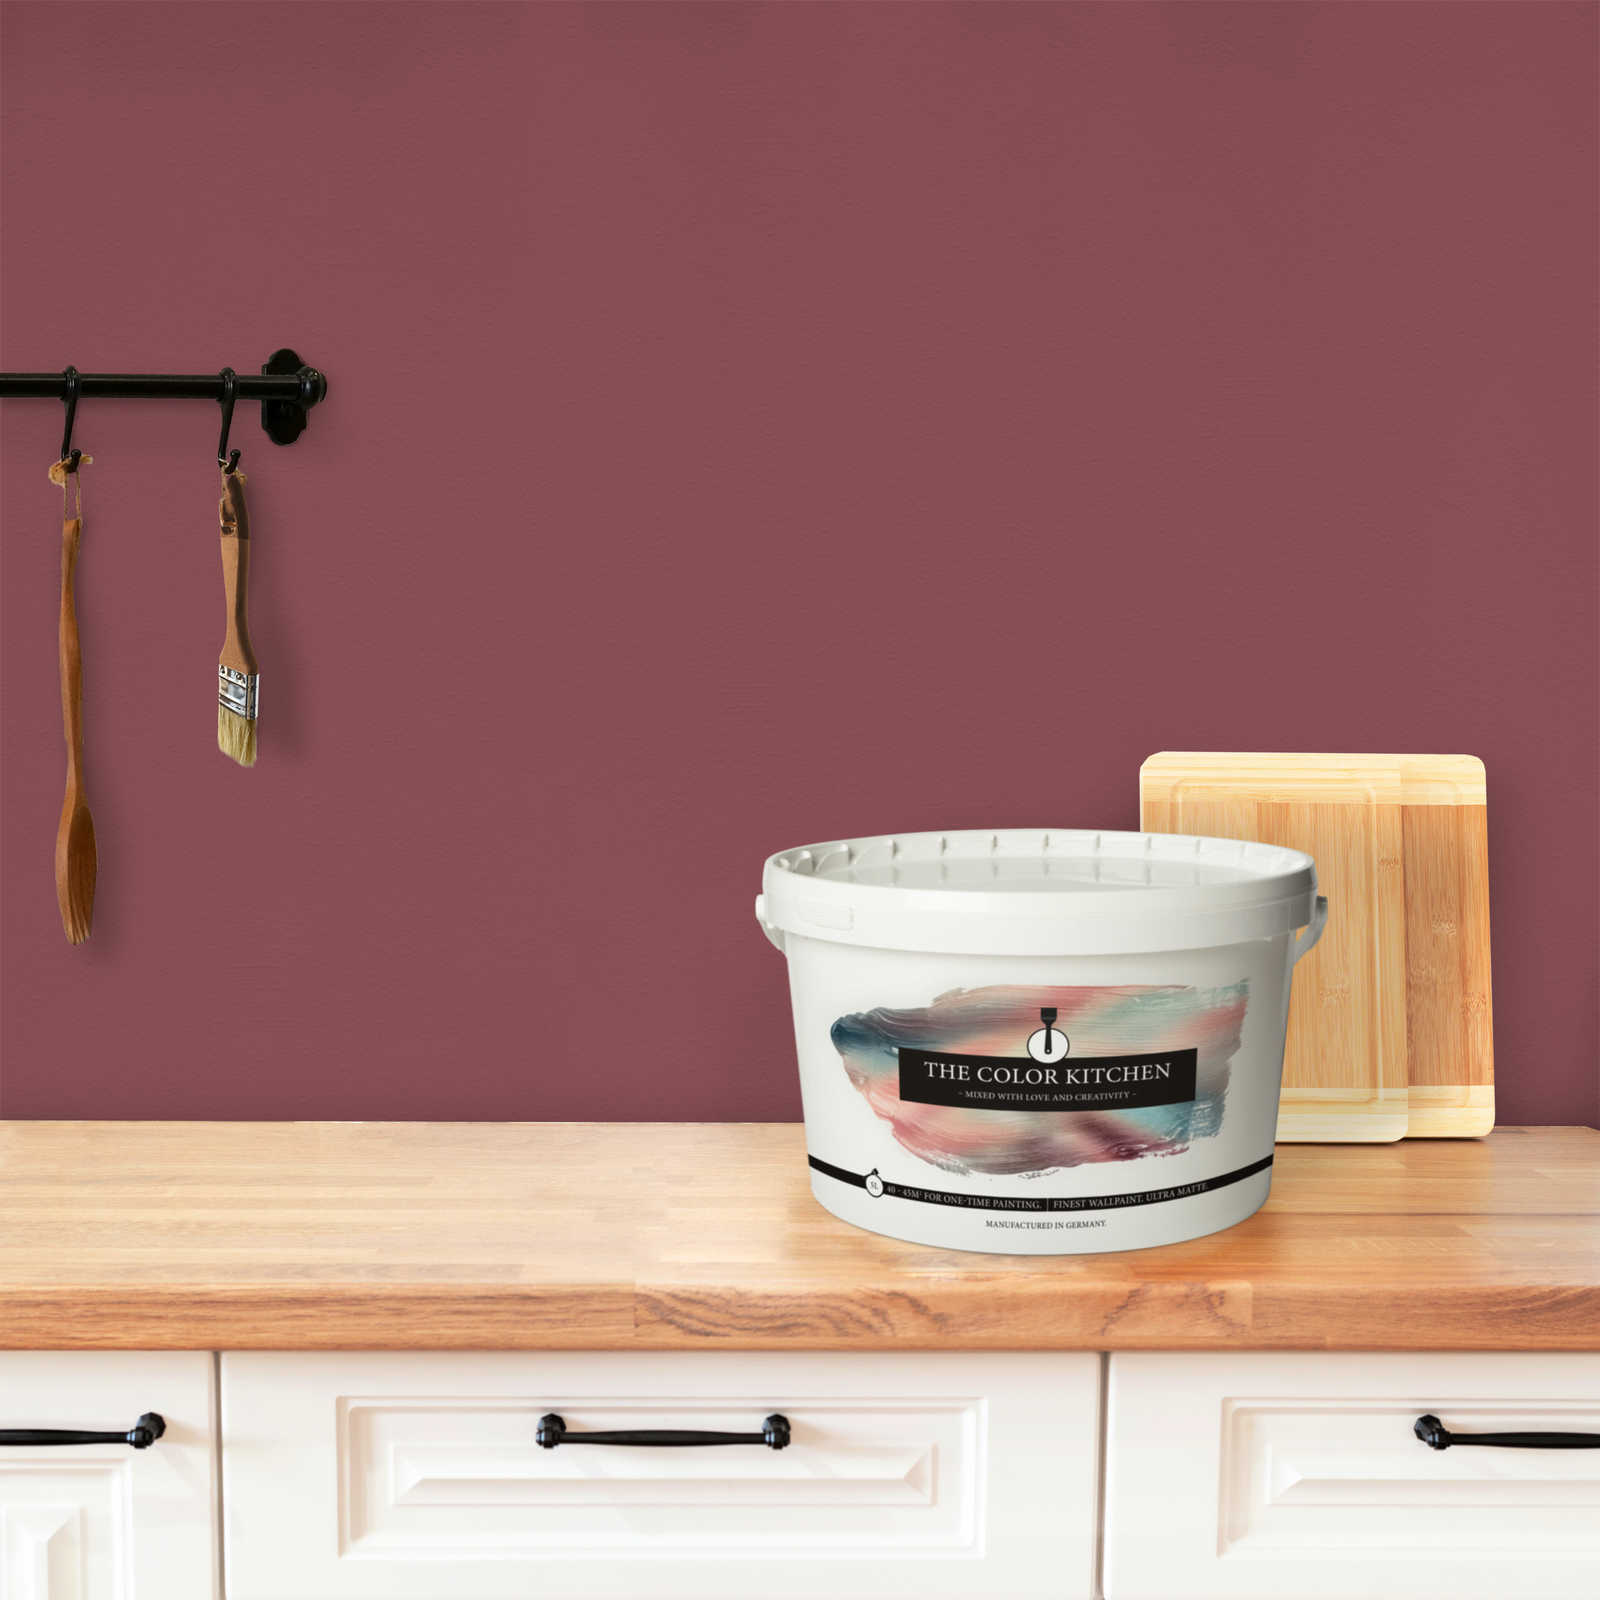             Wall Paint TCK7012 »Sweet Marmelade« in authentic berry shade – 5.0 litre
        